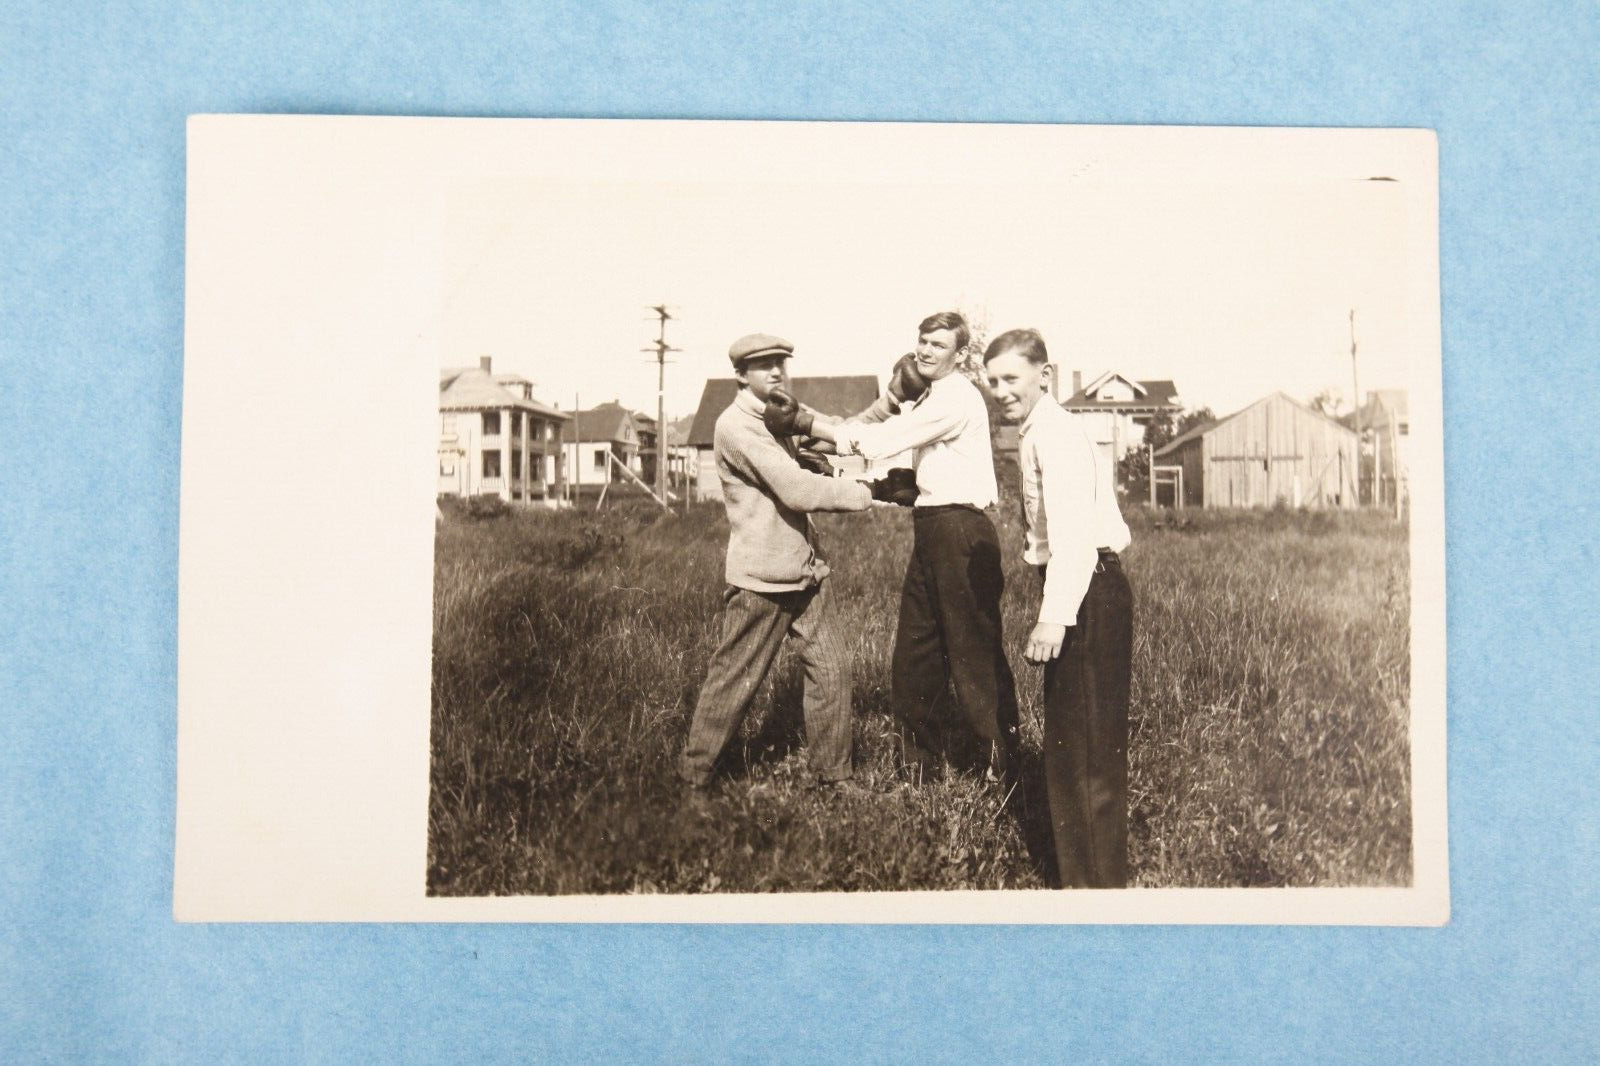 VINTAGE RPPC EARLY 1900s 3 BOYS BOXING & PLAYING IN FIELD POSTCARD